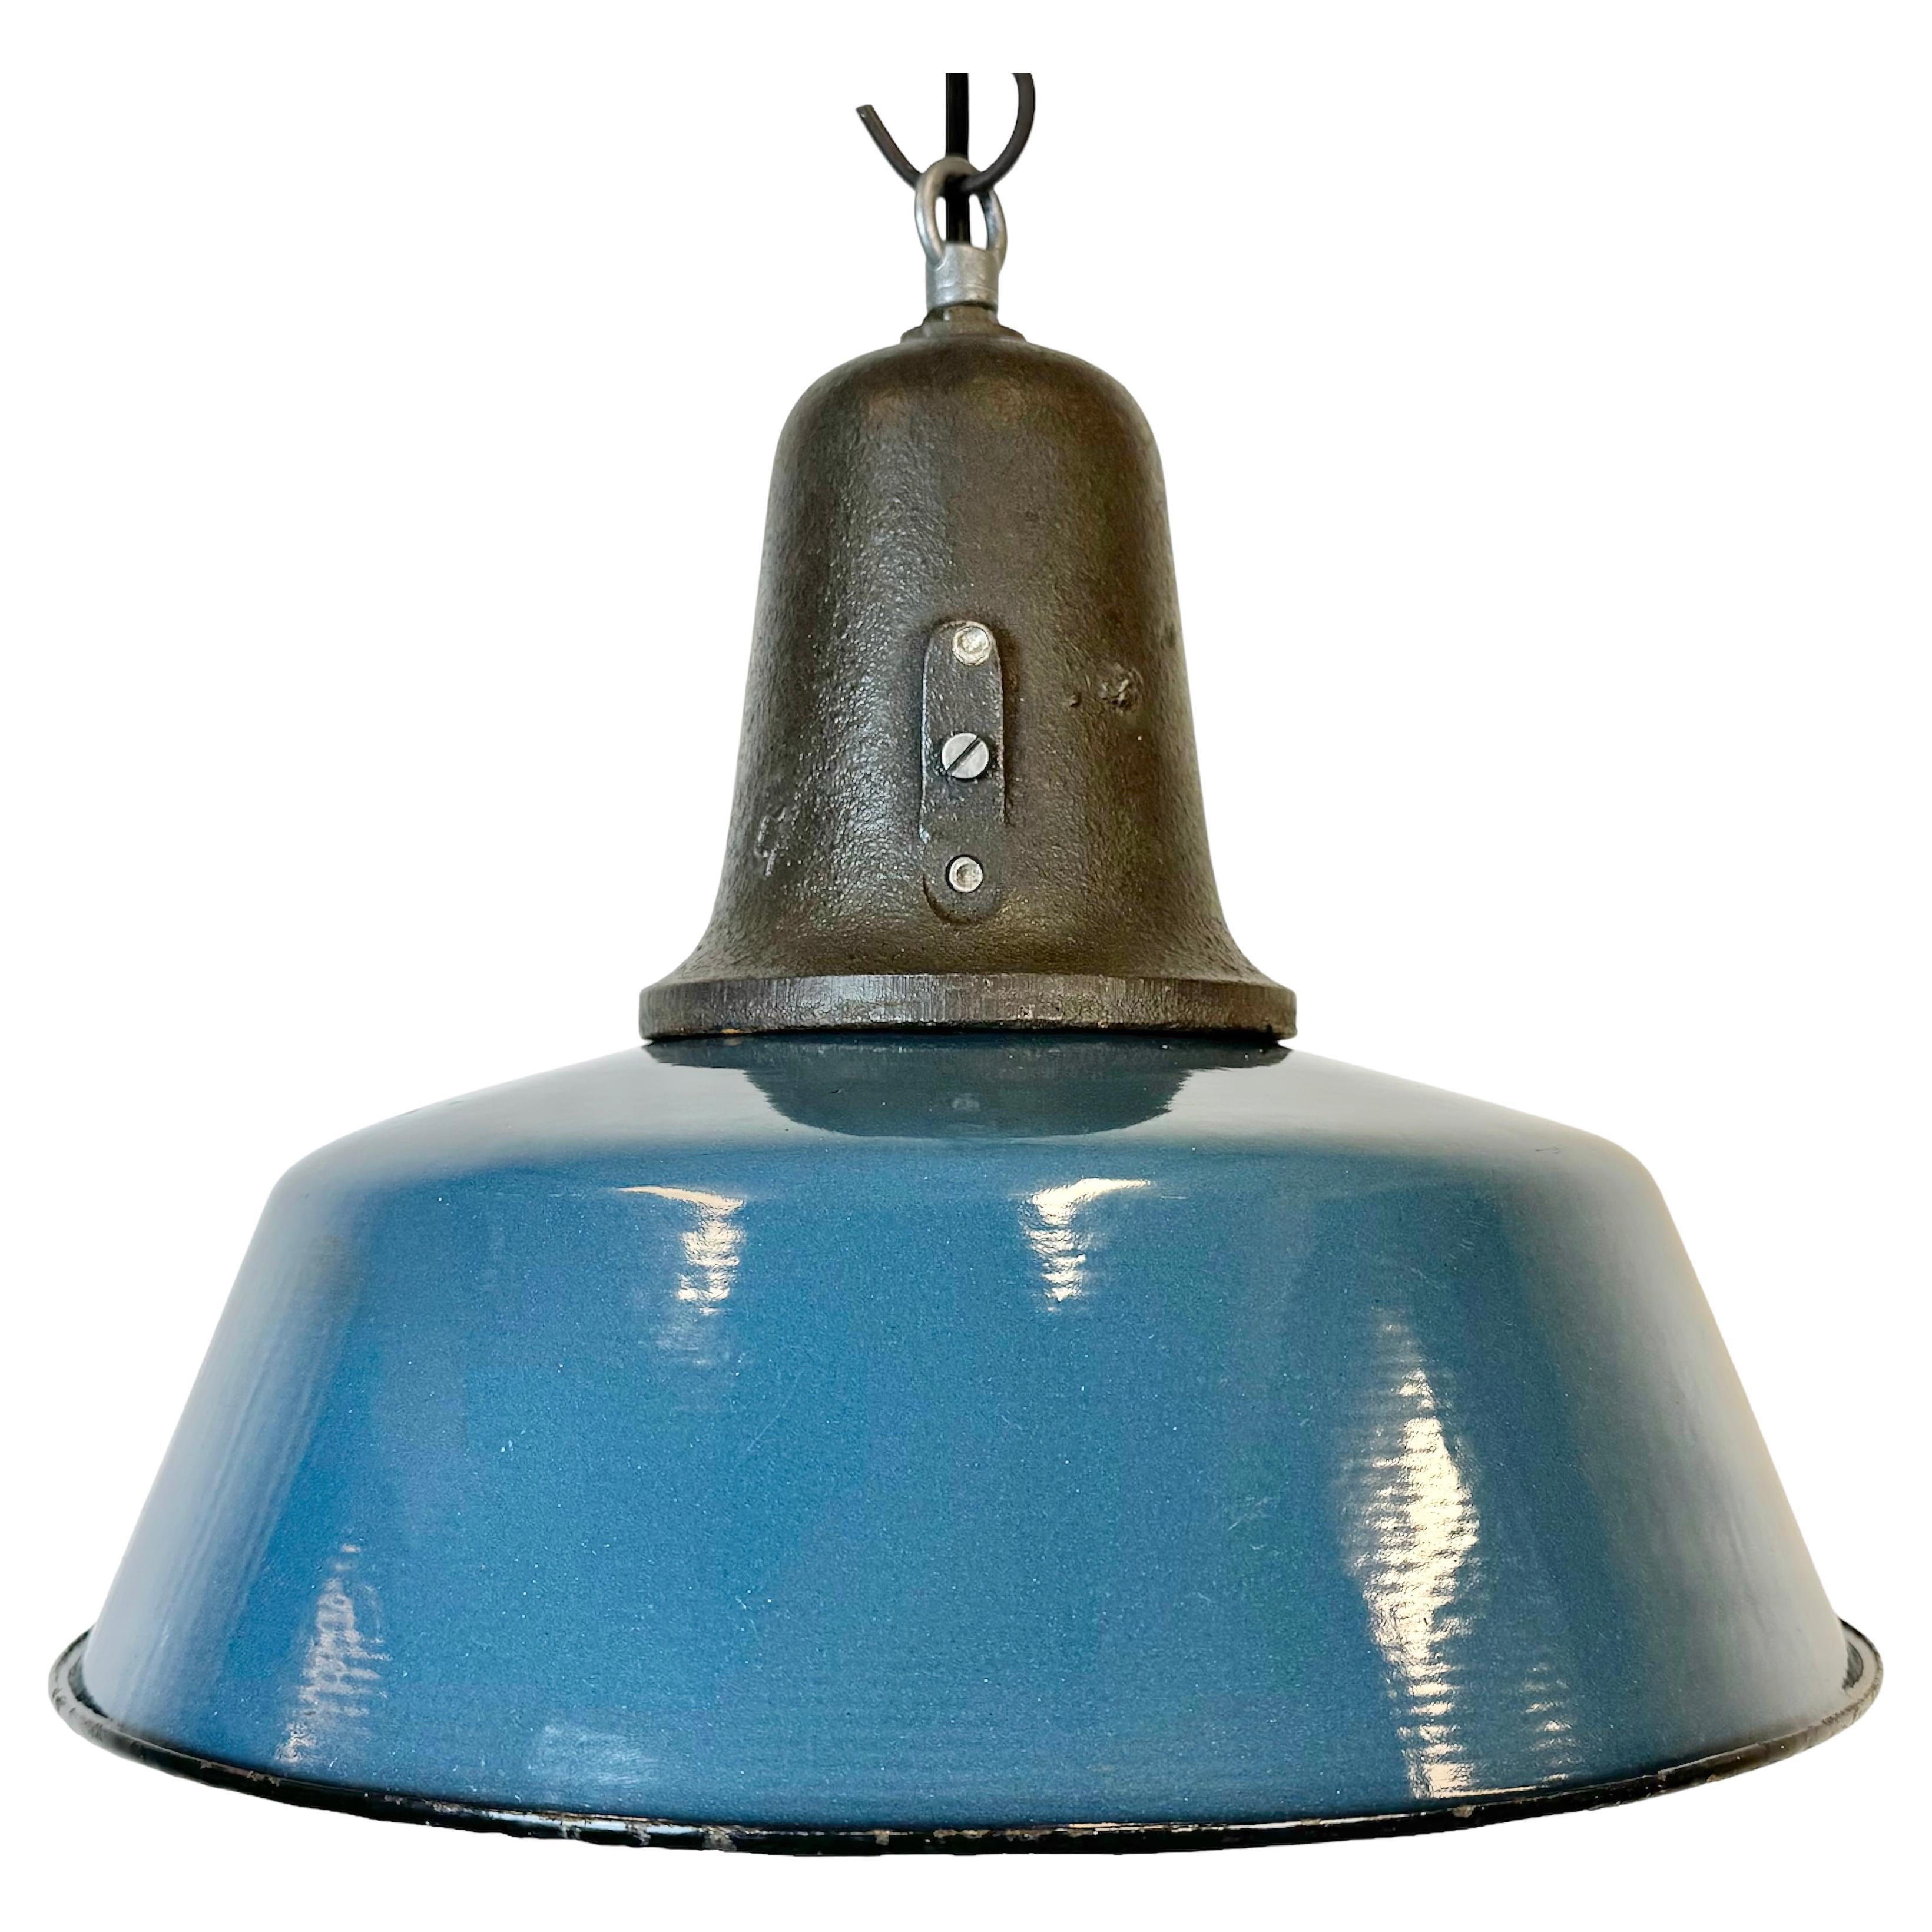 Industrial Blue Enamel Factory Lamp with Cast Iron Top, 1960s